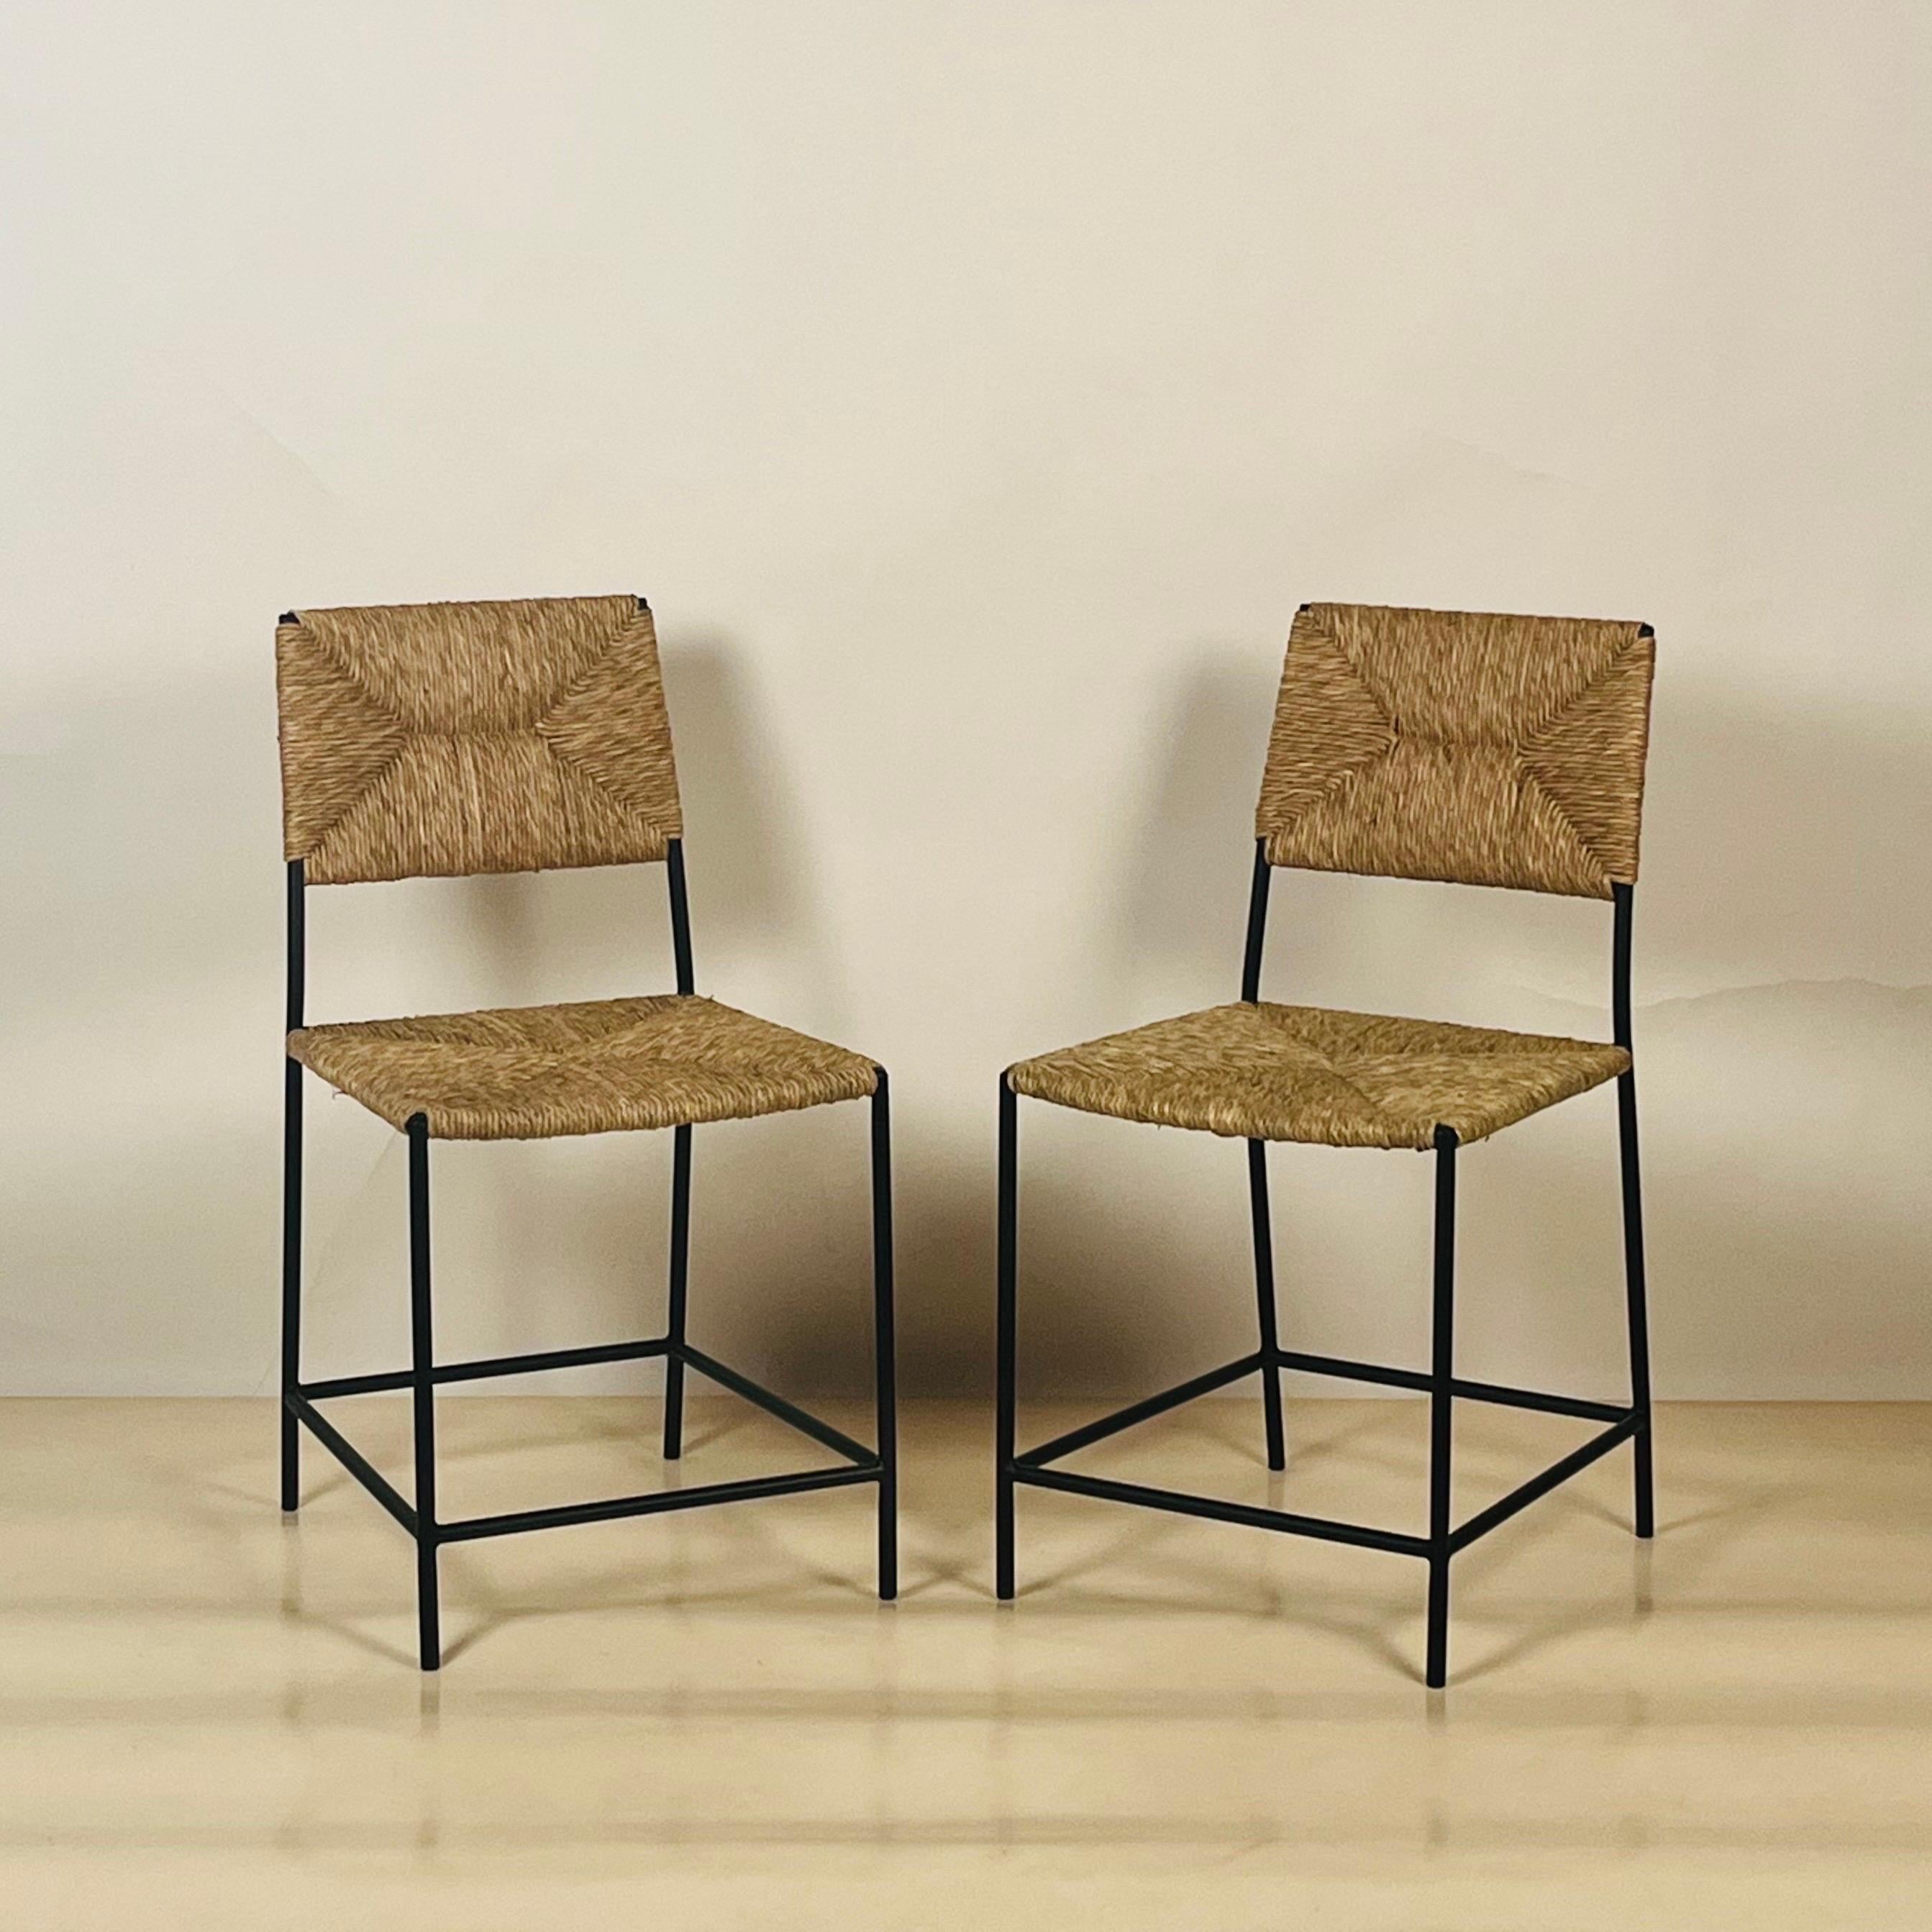 Set of 6 'Campagne' Dining Chairs by Design Frères.

18 1/2 seat height. Discrete non-scratch gliders on the tips of the legs (picture before last).

Sturdy and comfortable. Chic and understated.